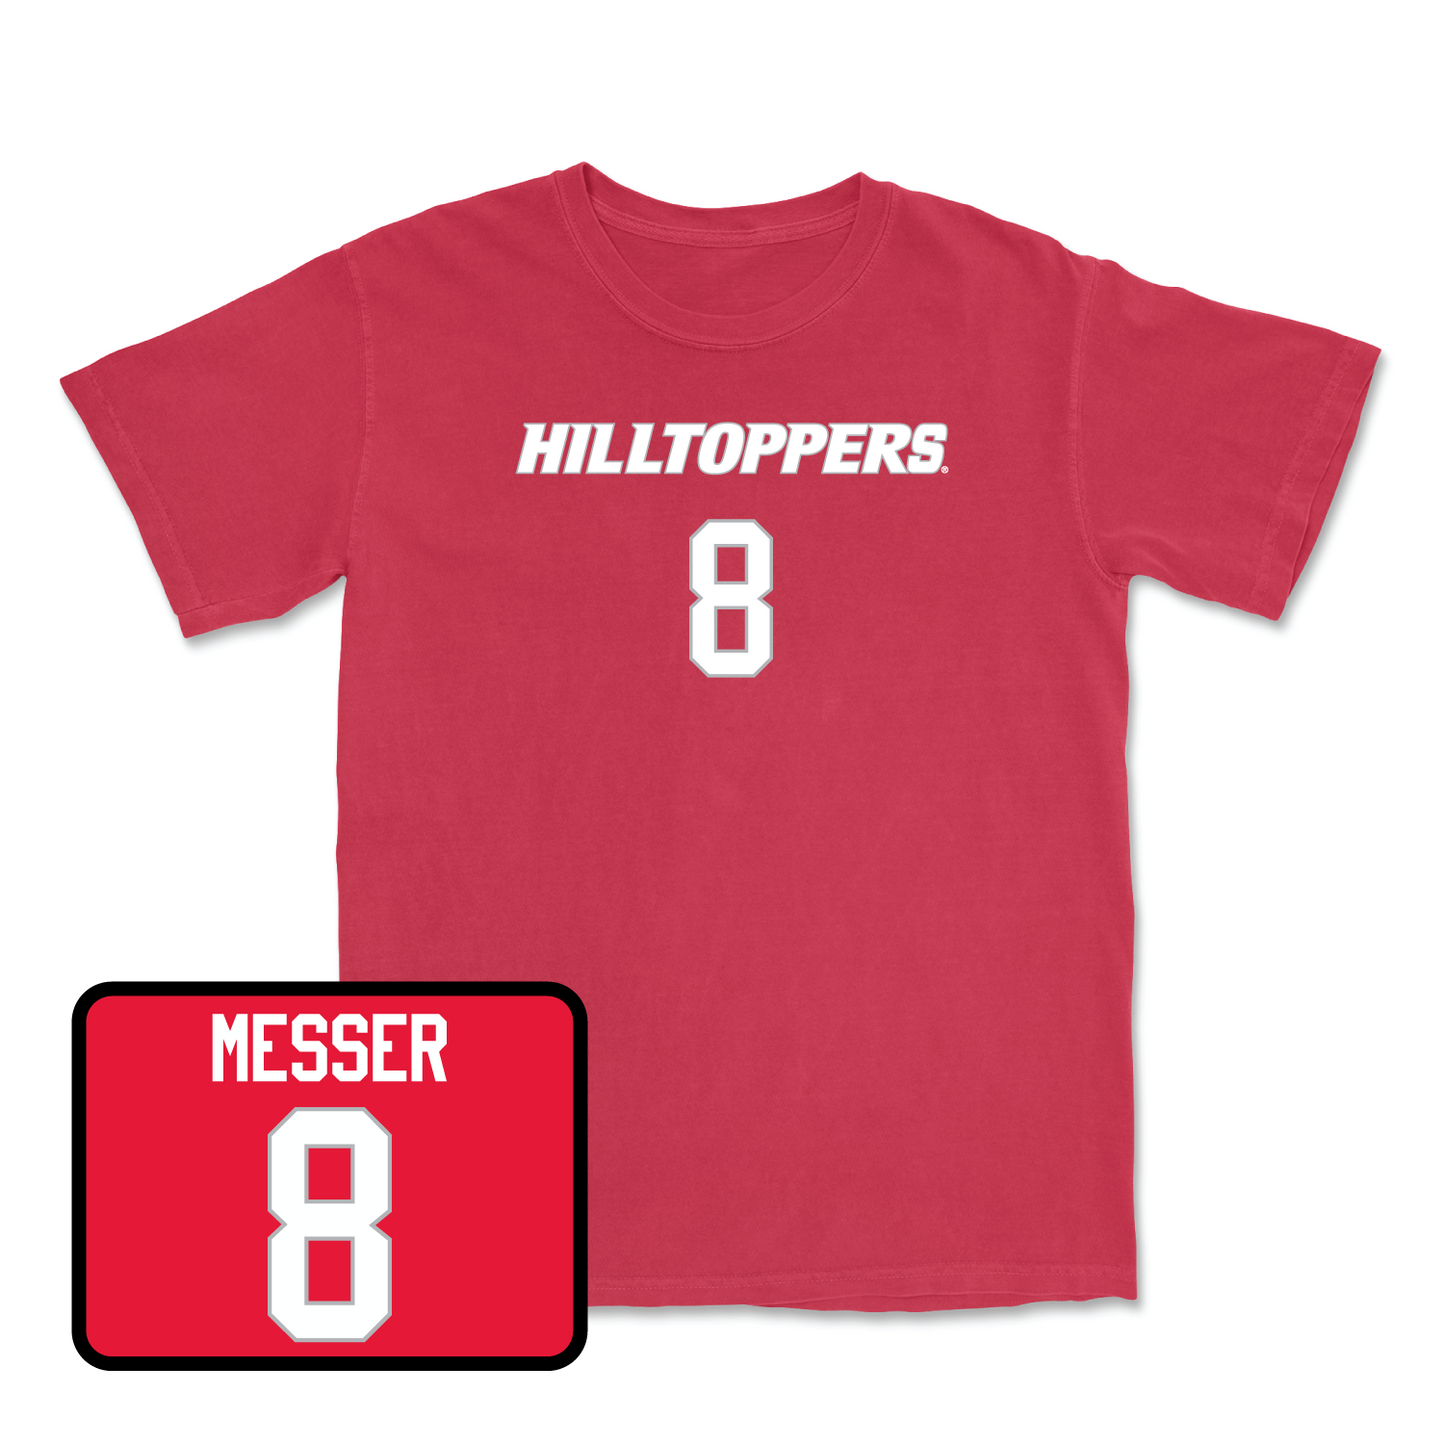 Red Football Hilltoppers Player Tee 2 3X-Large / Easton Messer | #8